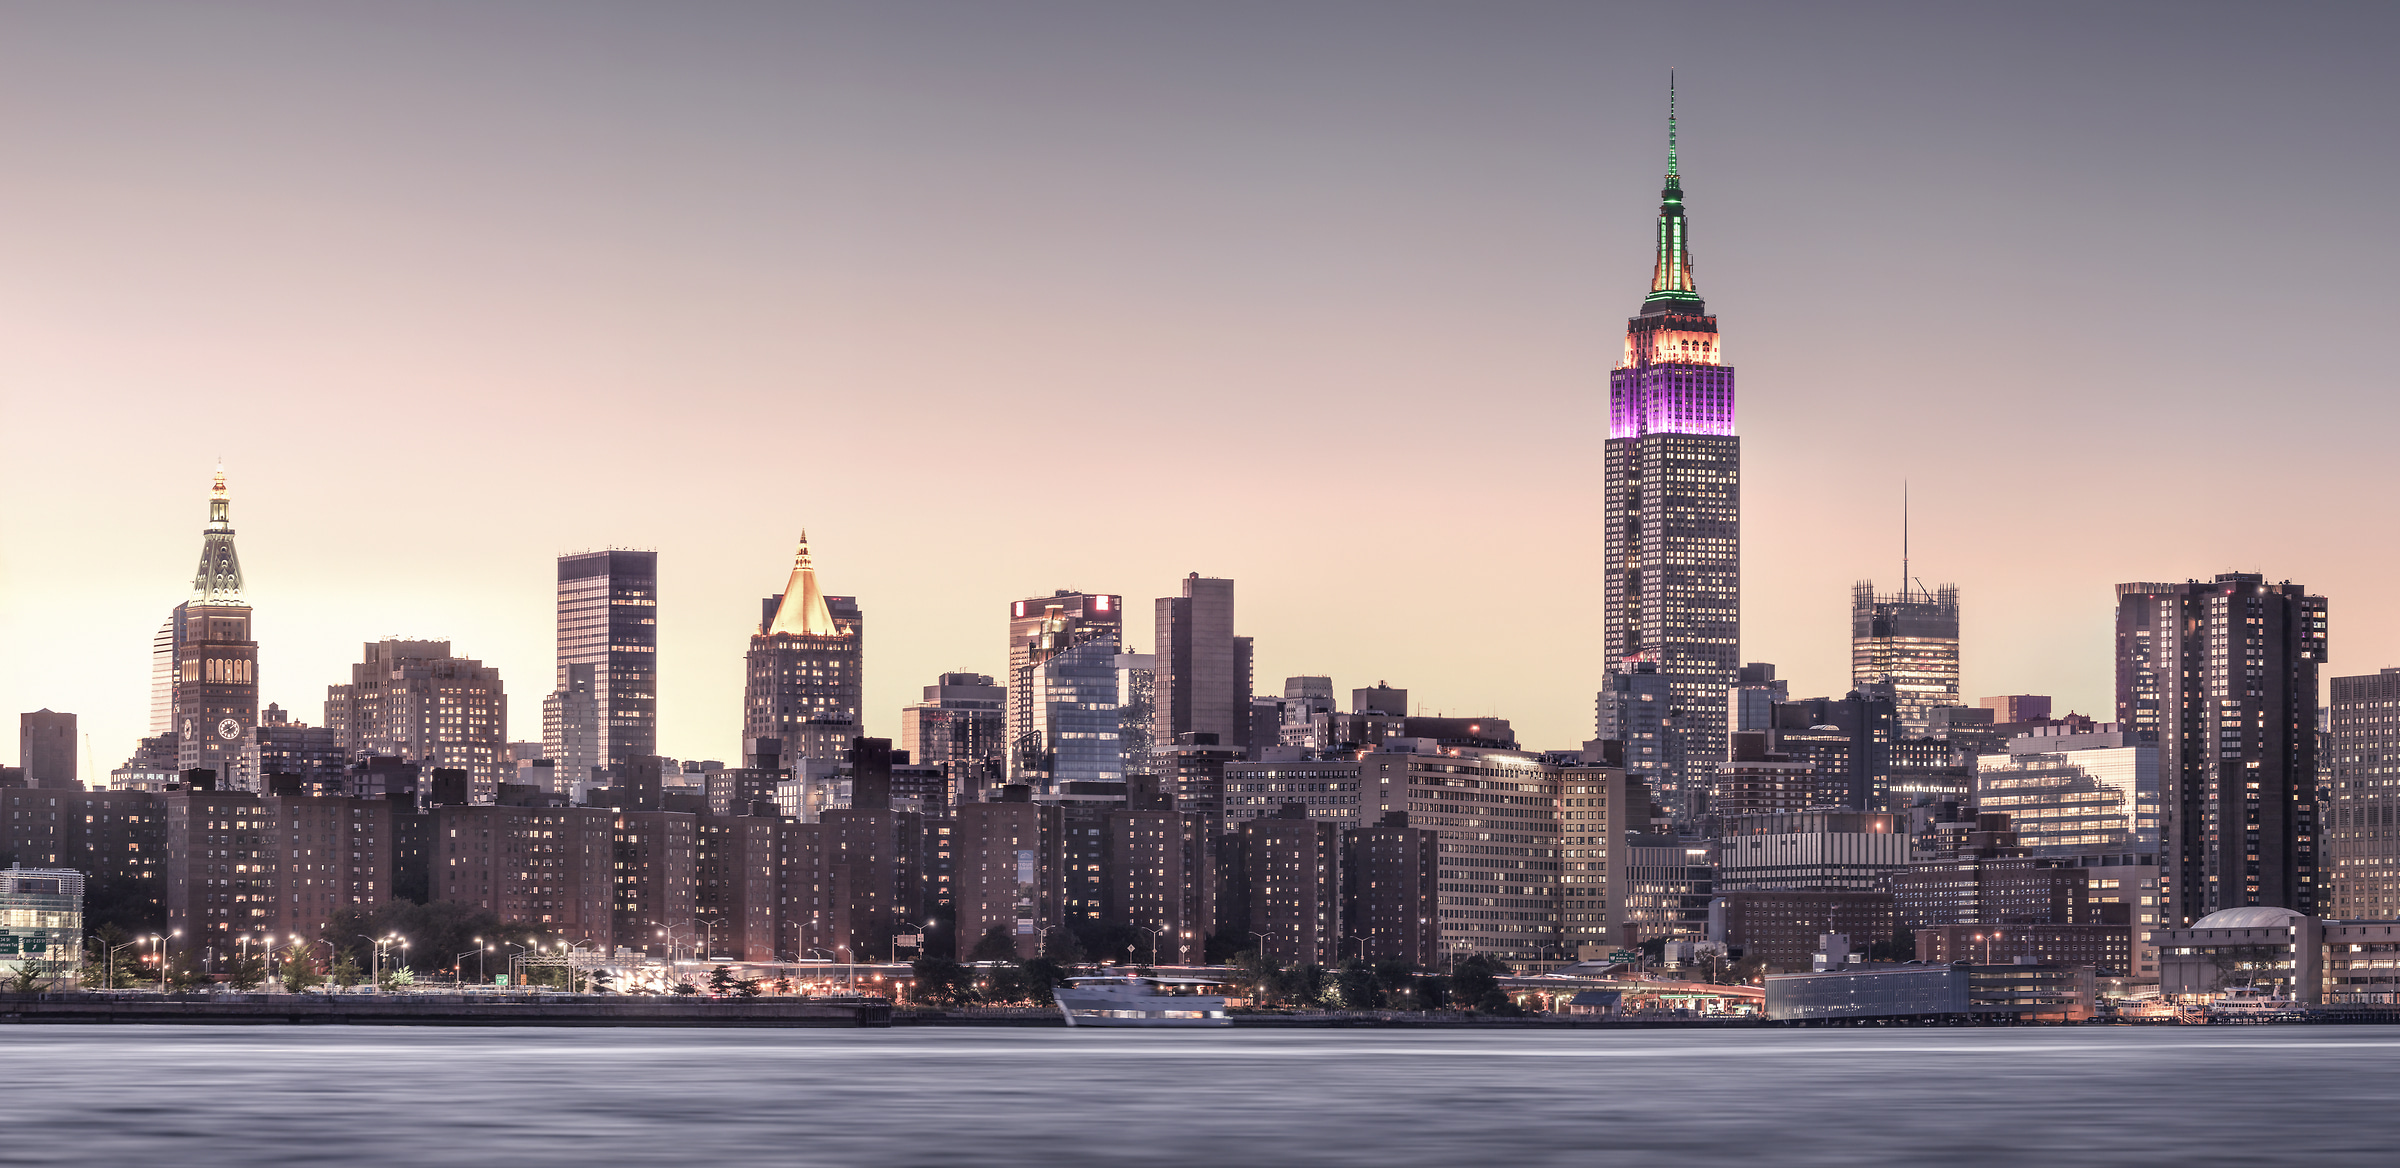 482 megapixels! Ultra high resolution cityscape VAST photo of the Empire State Building and Manhattan skyline at sunset in NYC; created by Dan Piech